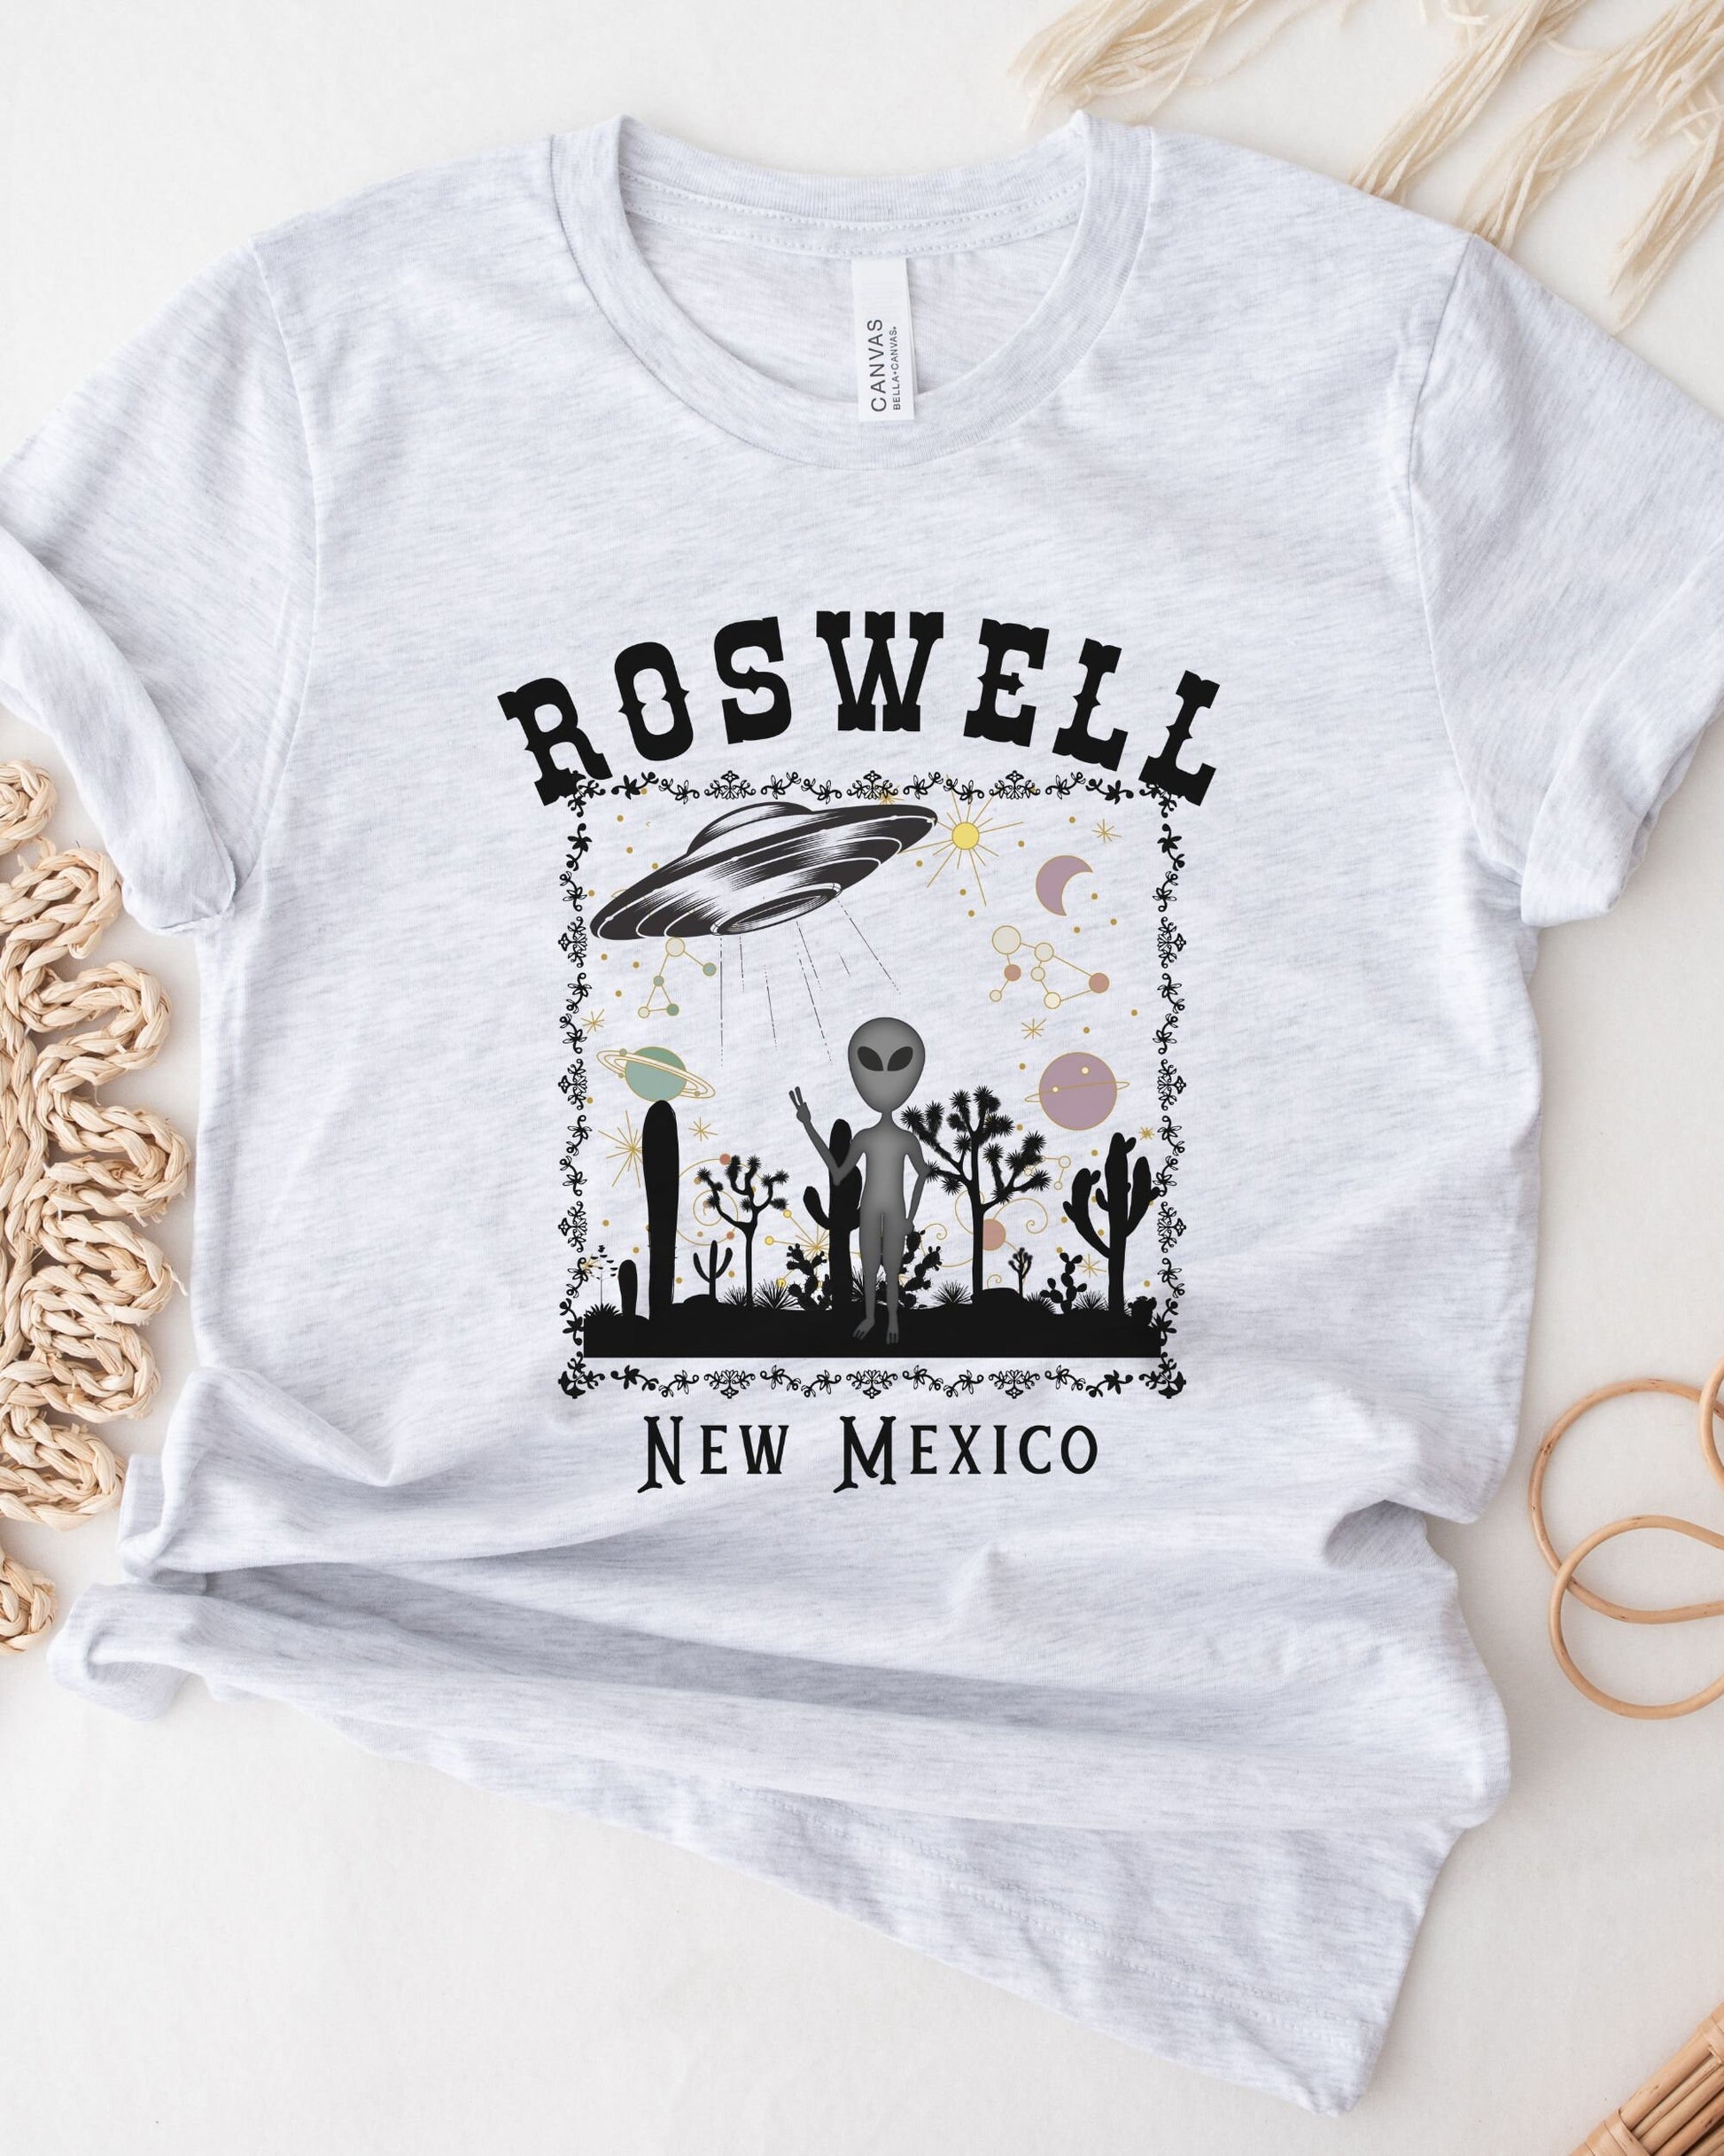 Alien Tshirt UFO Shirt Roswell New Mexico Cryptozoology Shirt Southwestern Shirt Western Graphic Tees Retro New Mexico Tee Cosmic Cowgirl